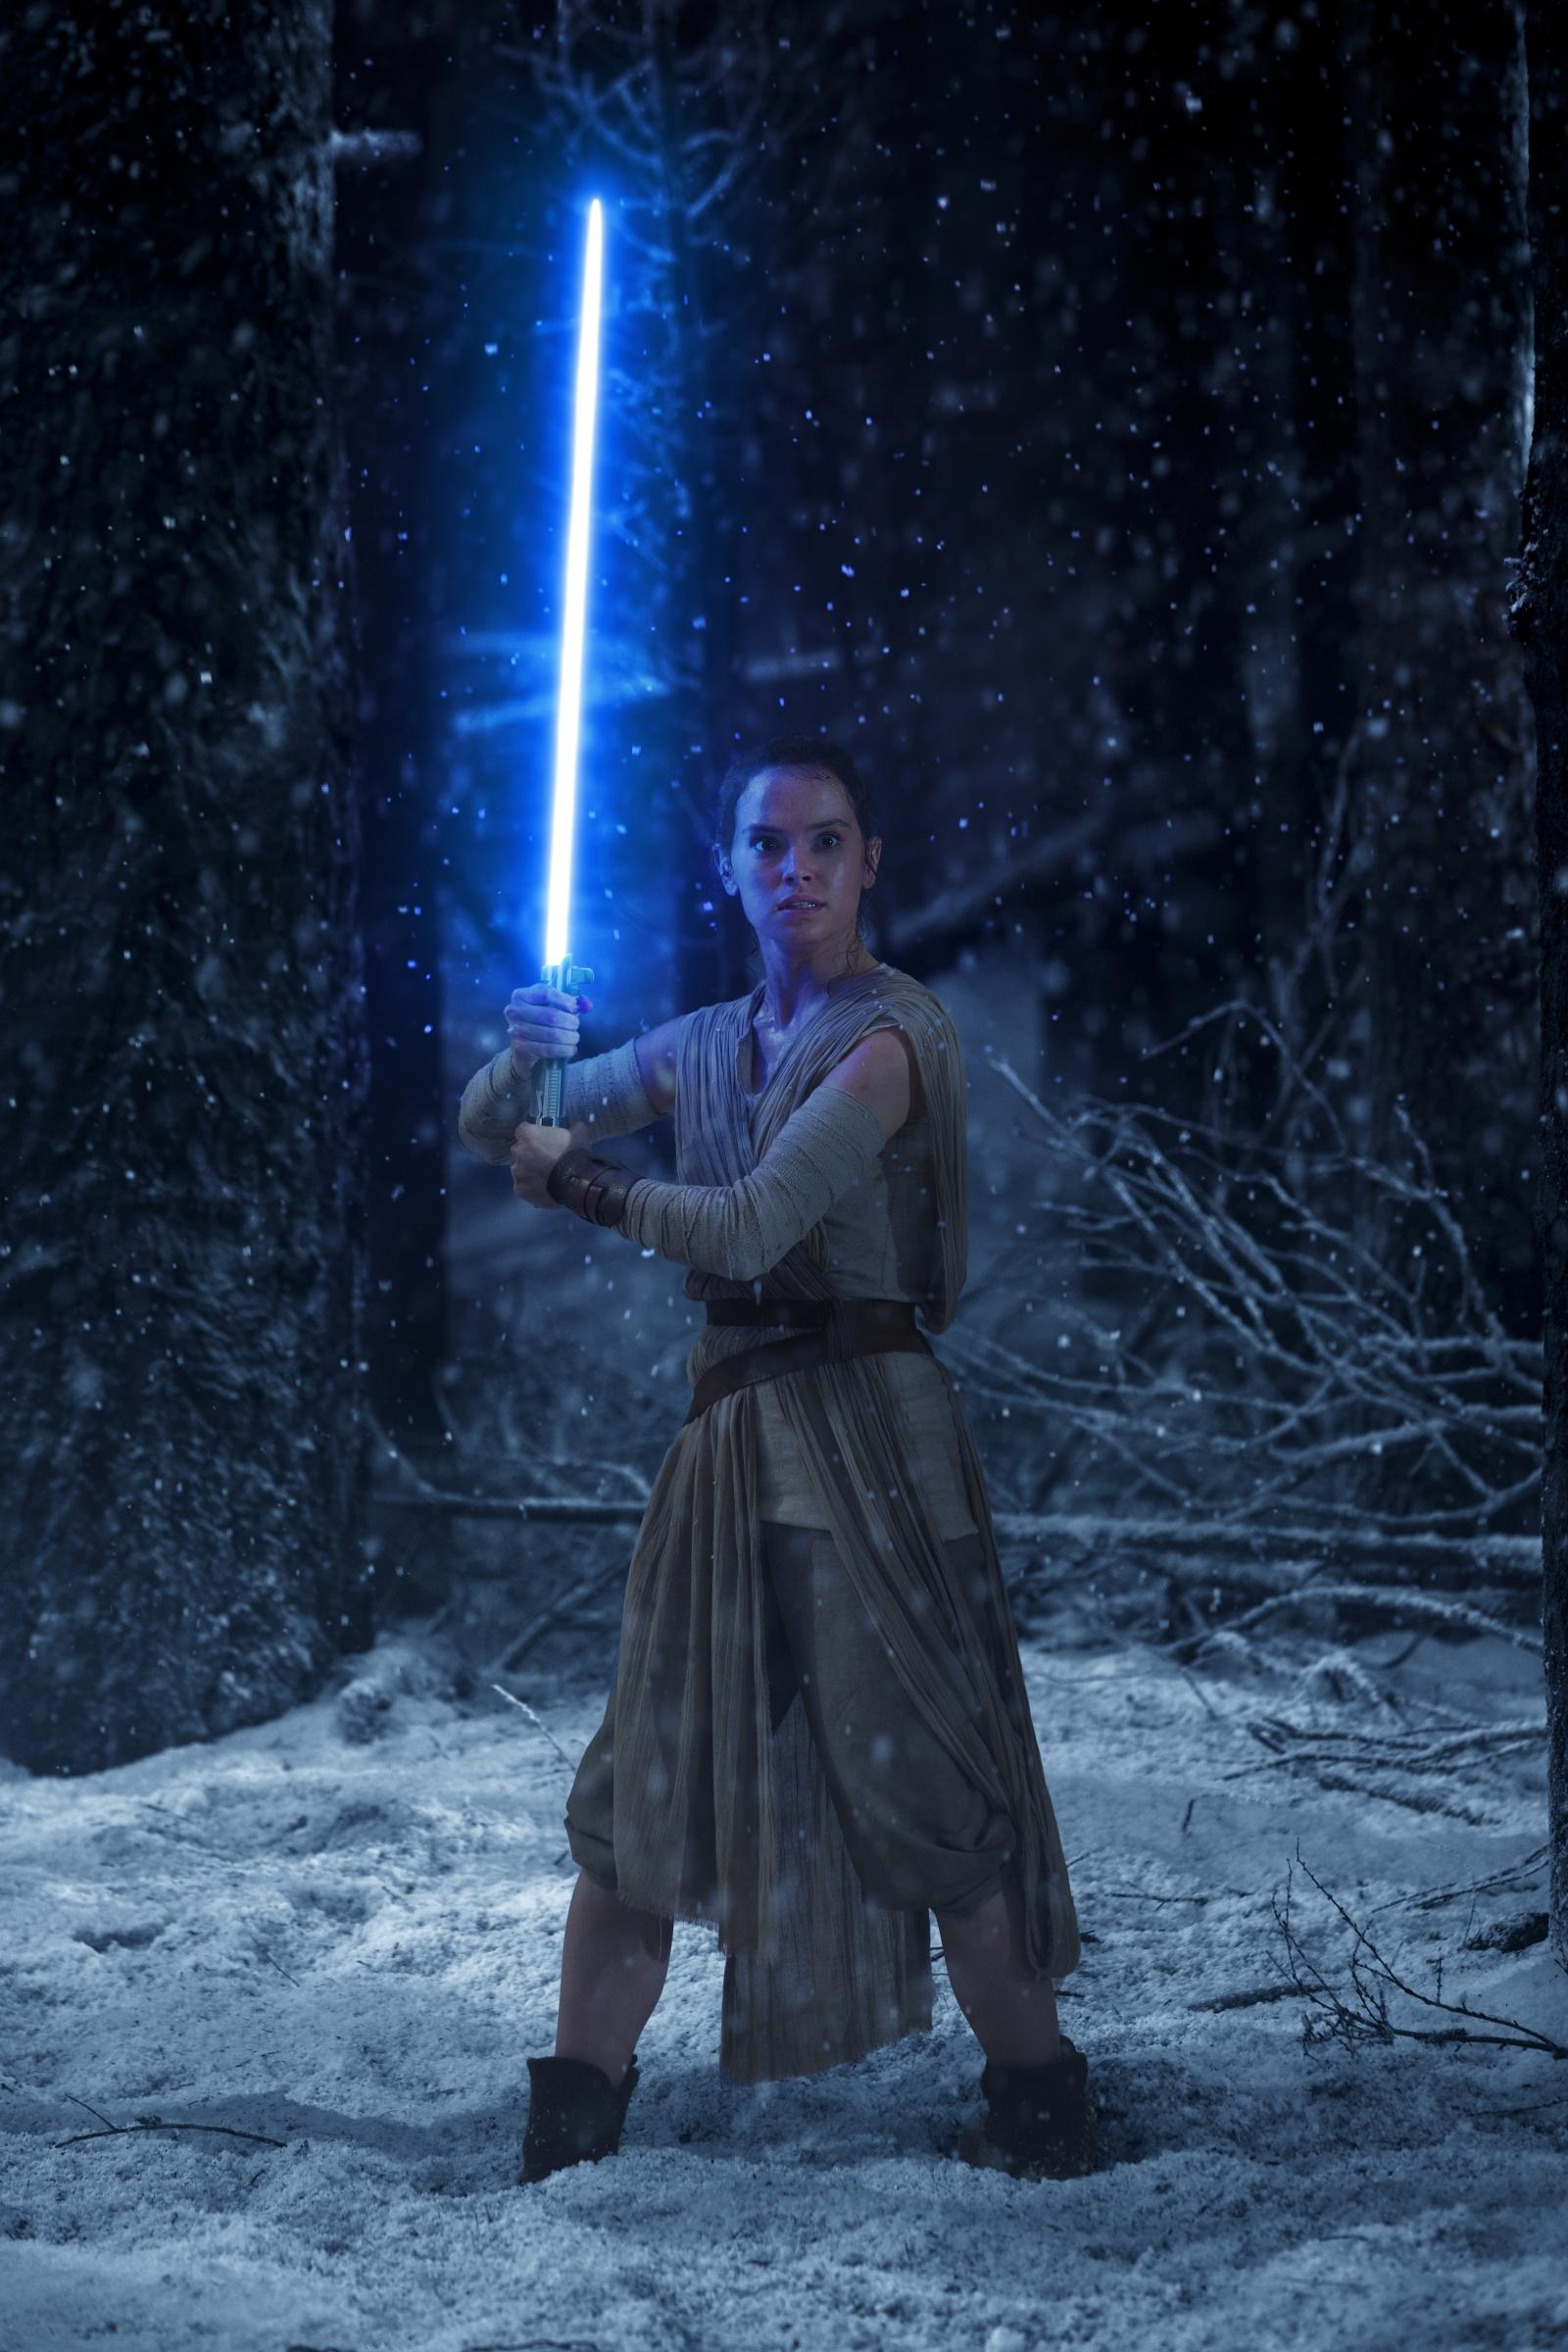 New Star Wars theory suggests Daisy Ridley's Rey could be